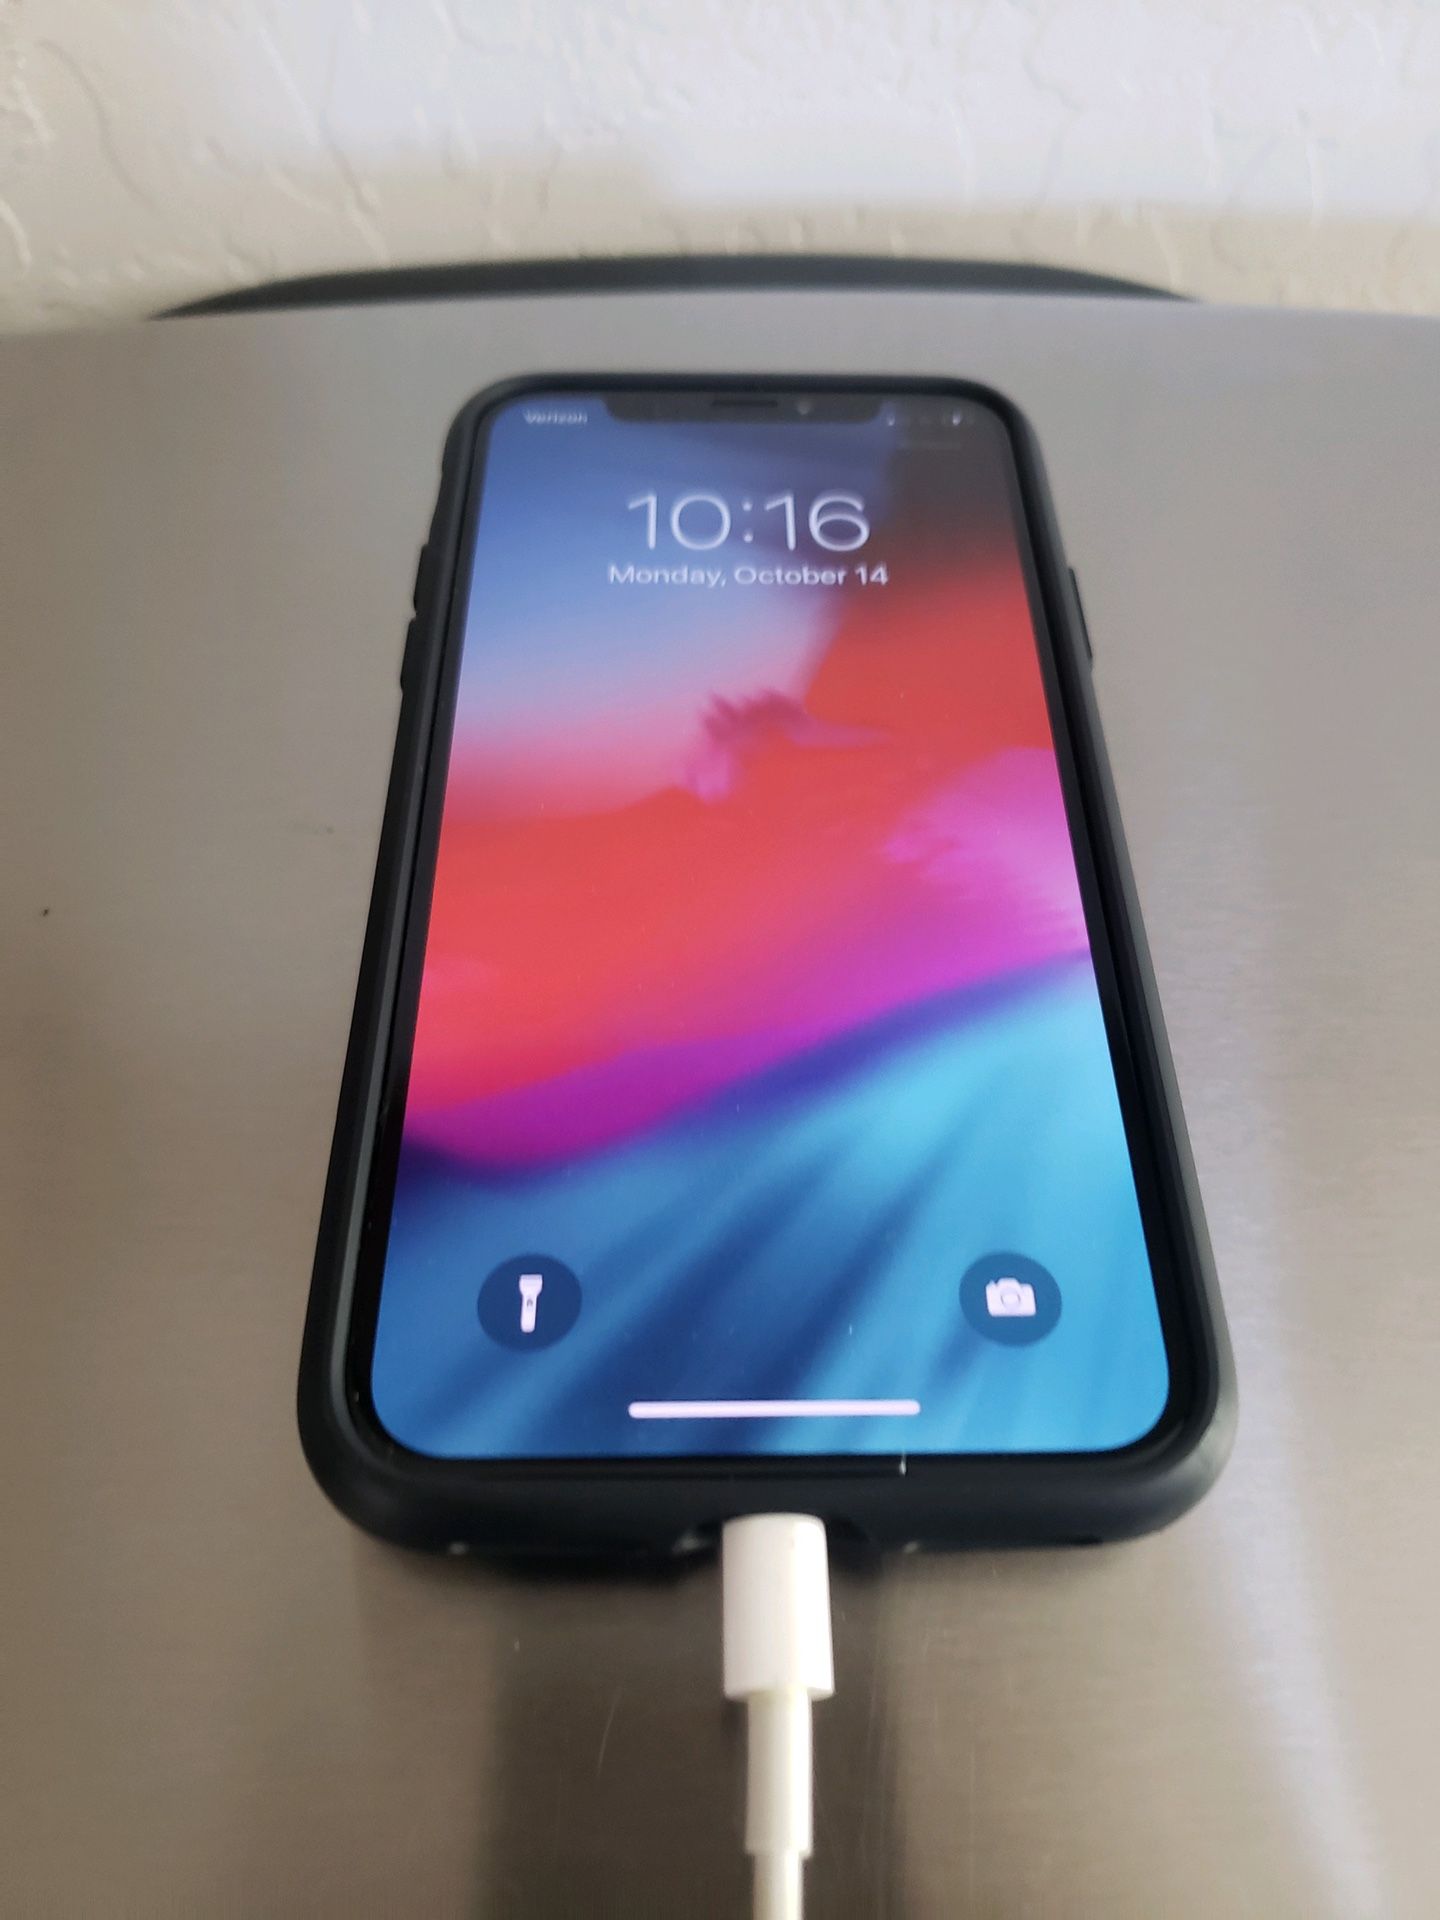 iPhone X 64GB*UNLOCKED and No scratches on screen*